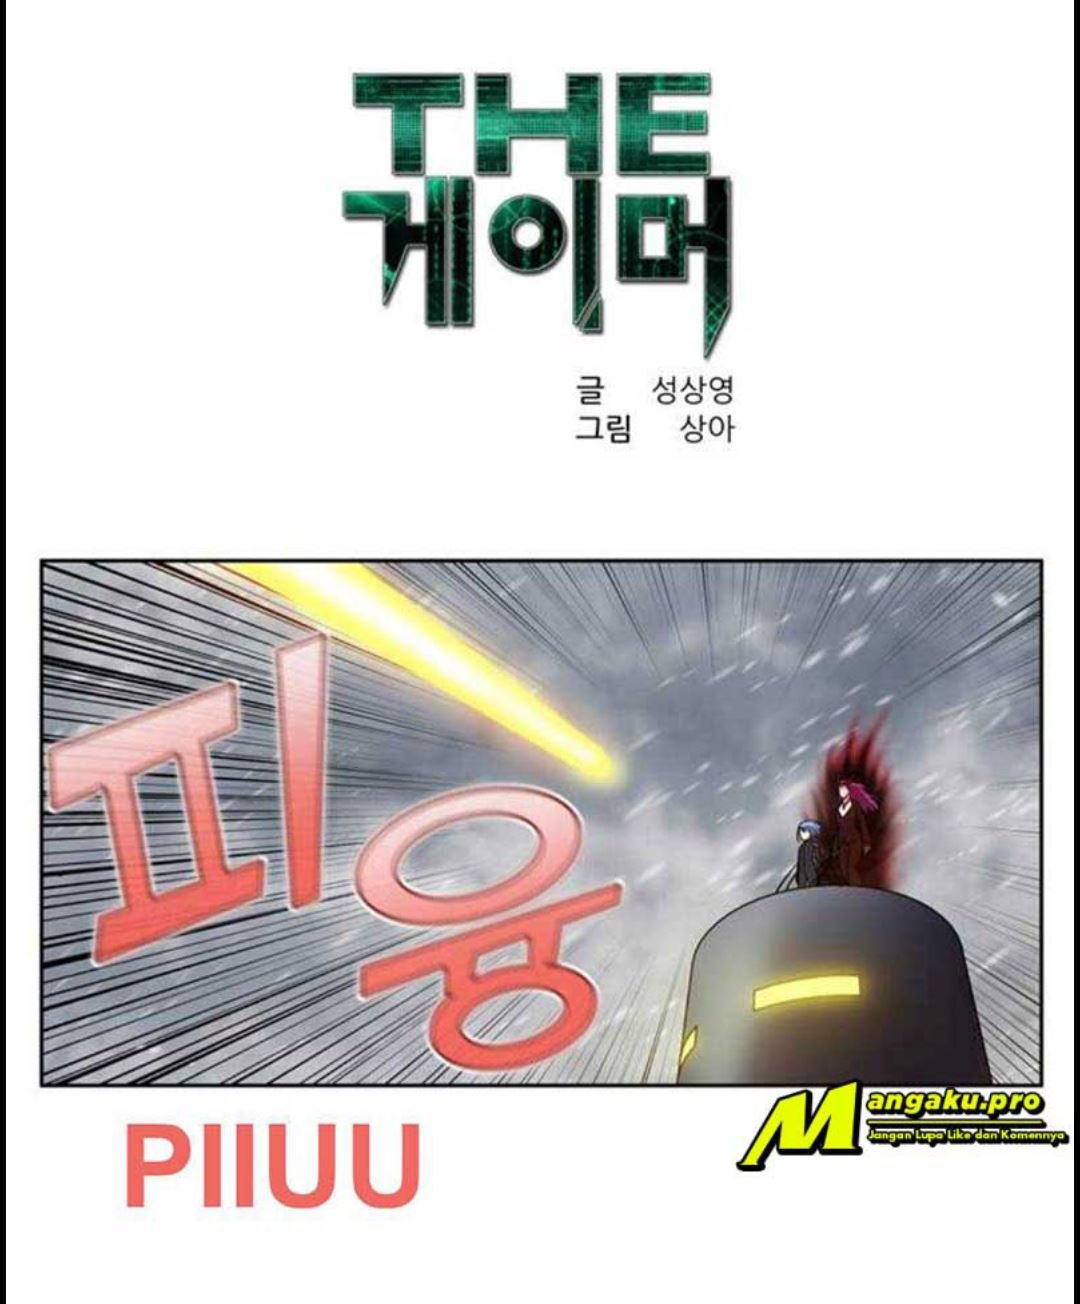 The Gamer Chapter 356